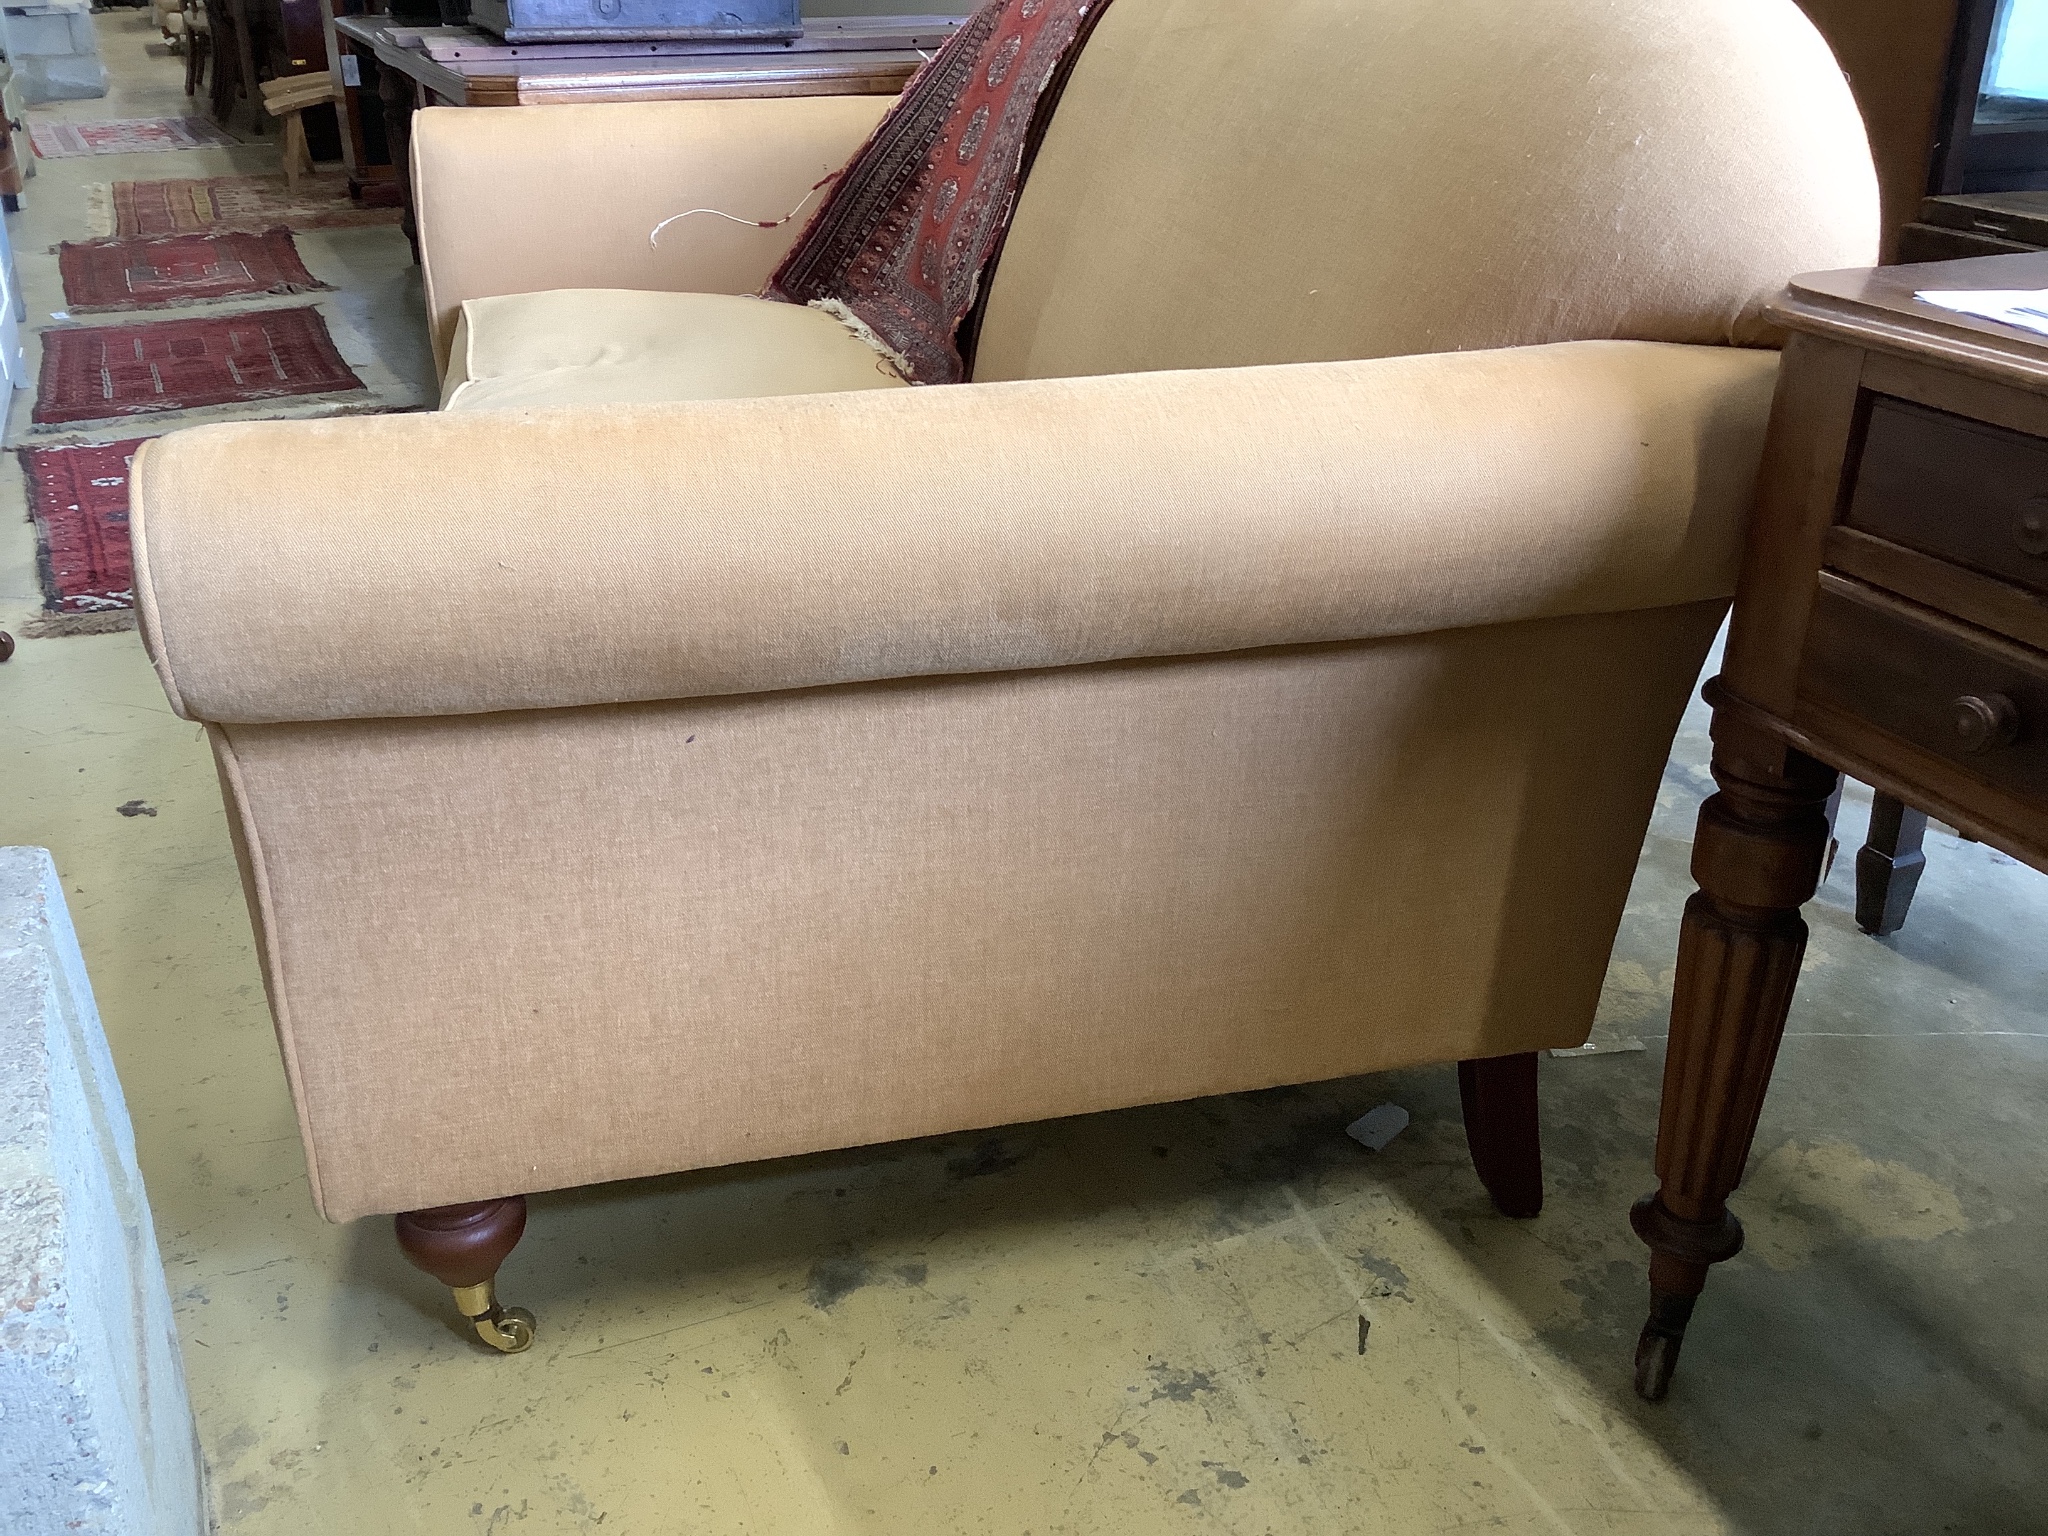 A large modern two seater settee upholstered in beige fabric W-200, D-98, H-94.